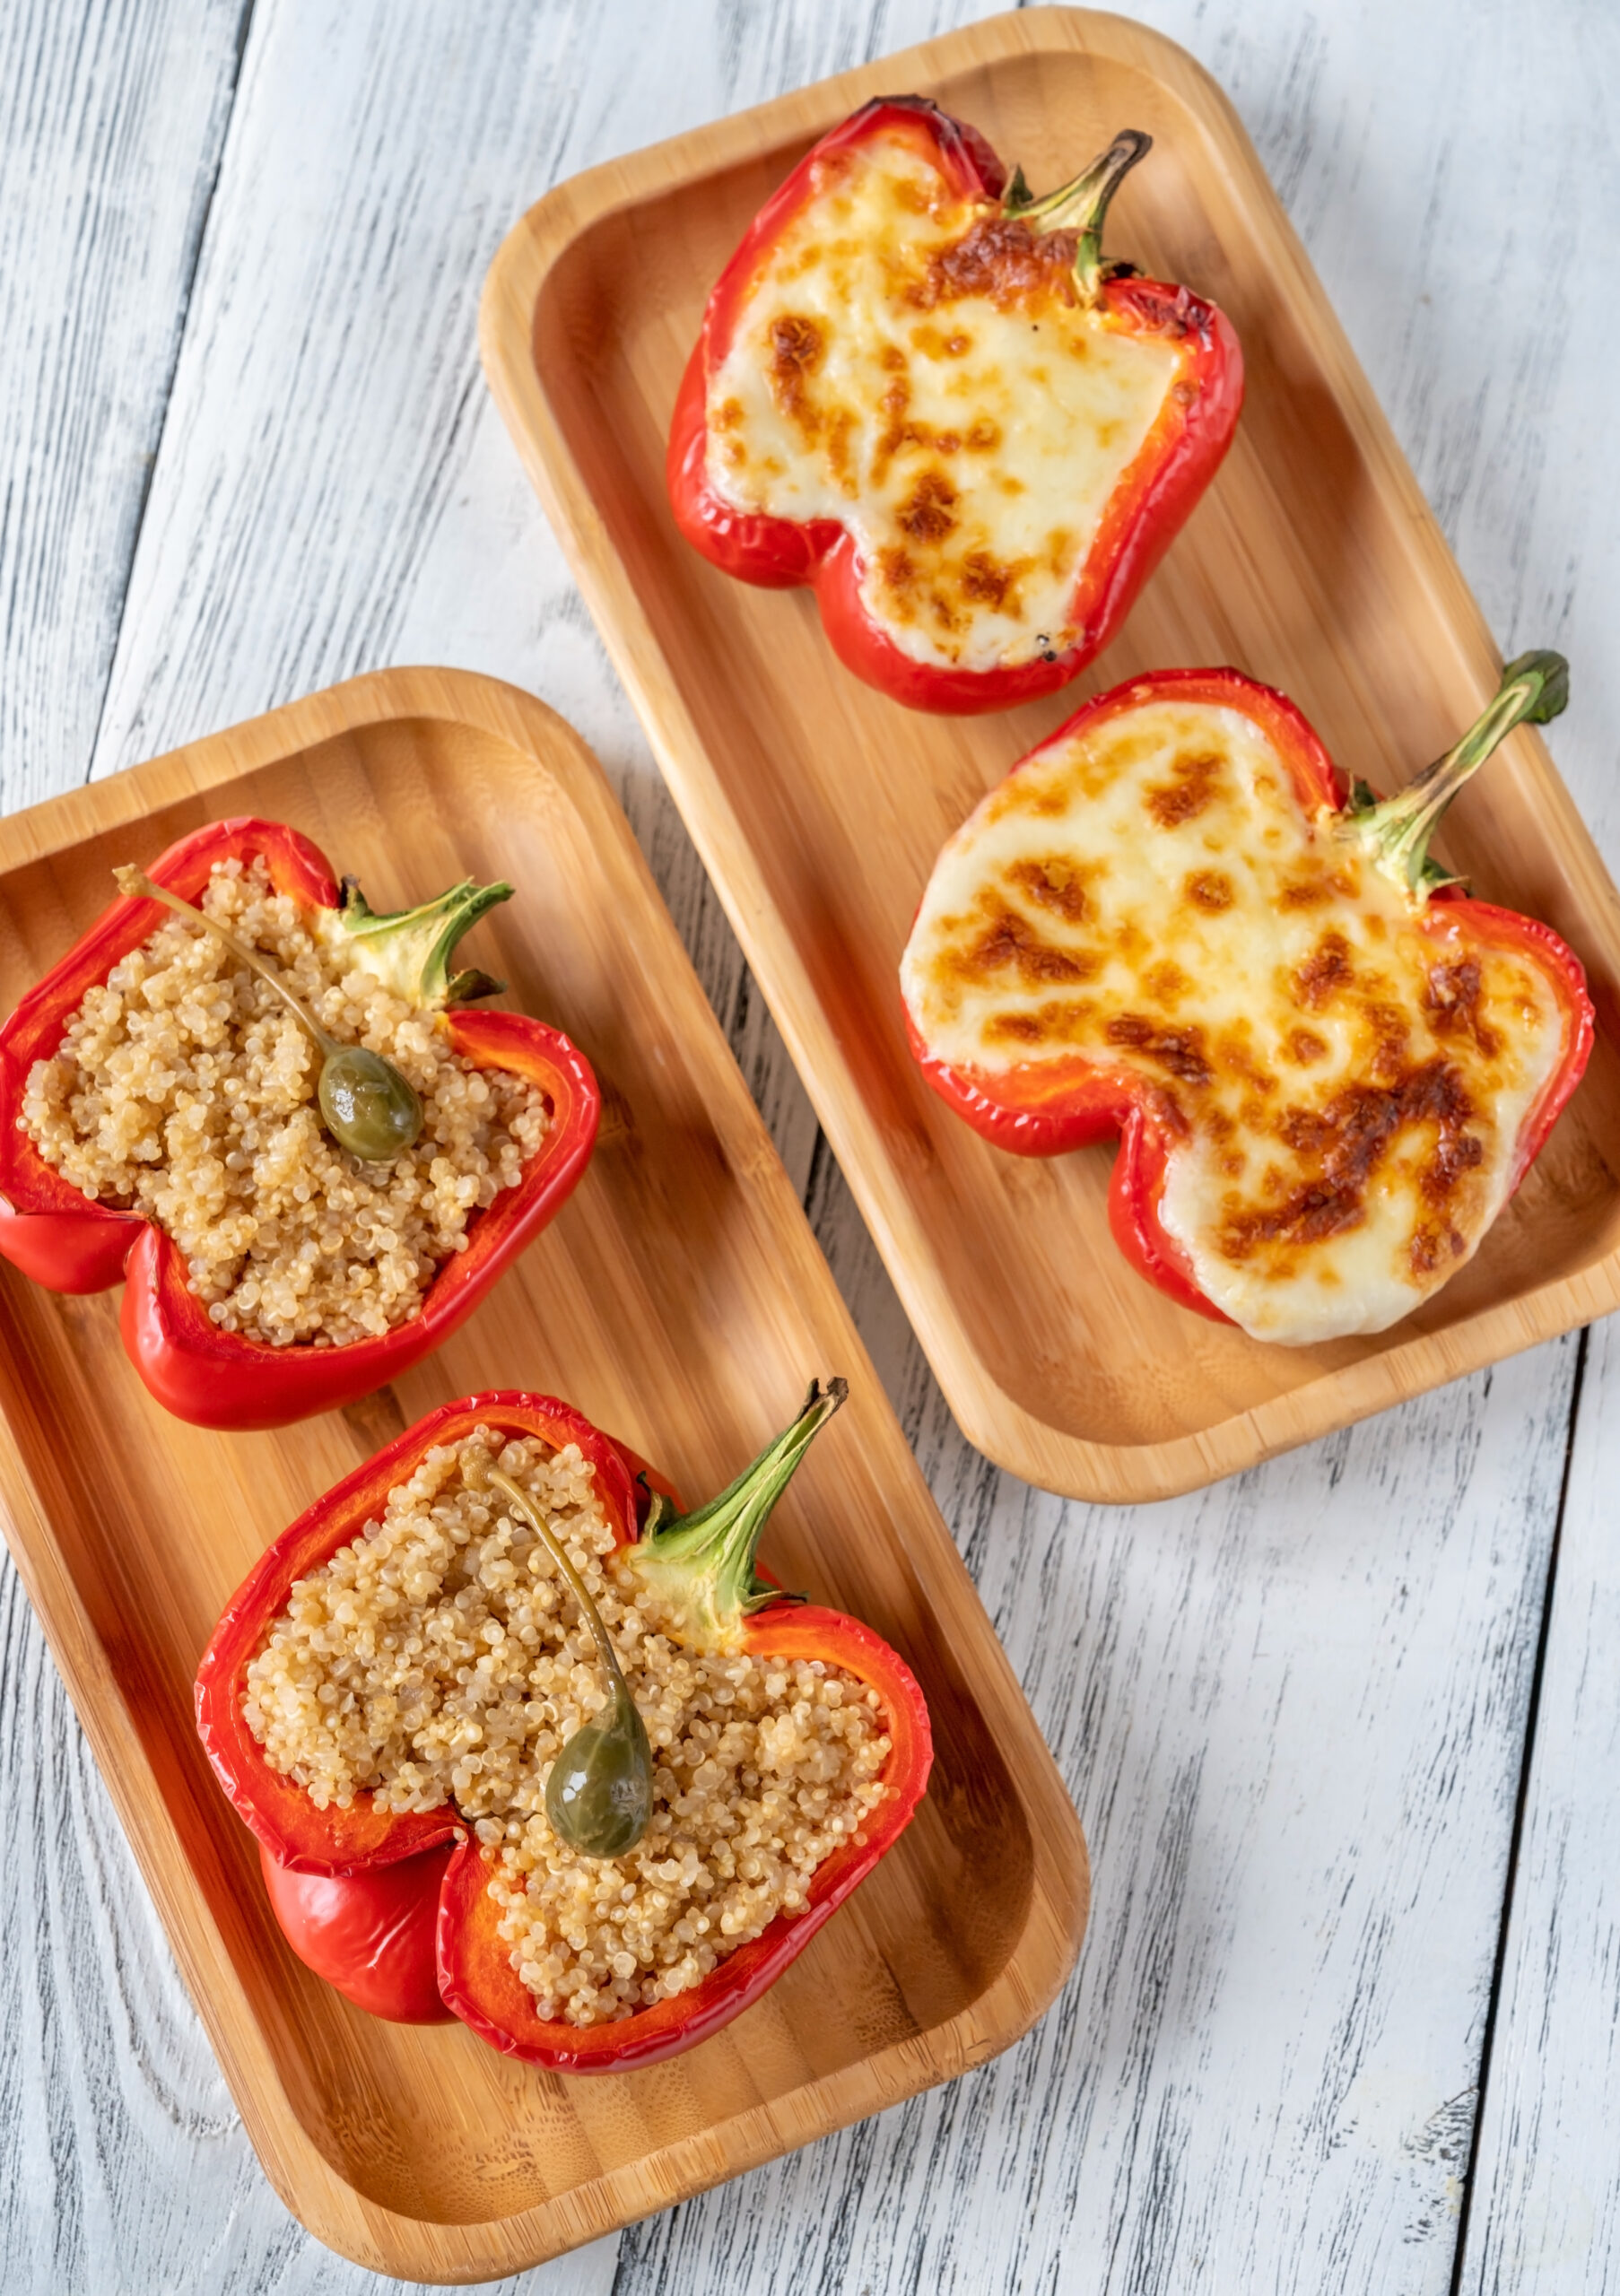 Baked Quinoa and Cheese Stuffed Peppers | Slimming World Friendly Recipe – Fatgirlskinny.net